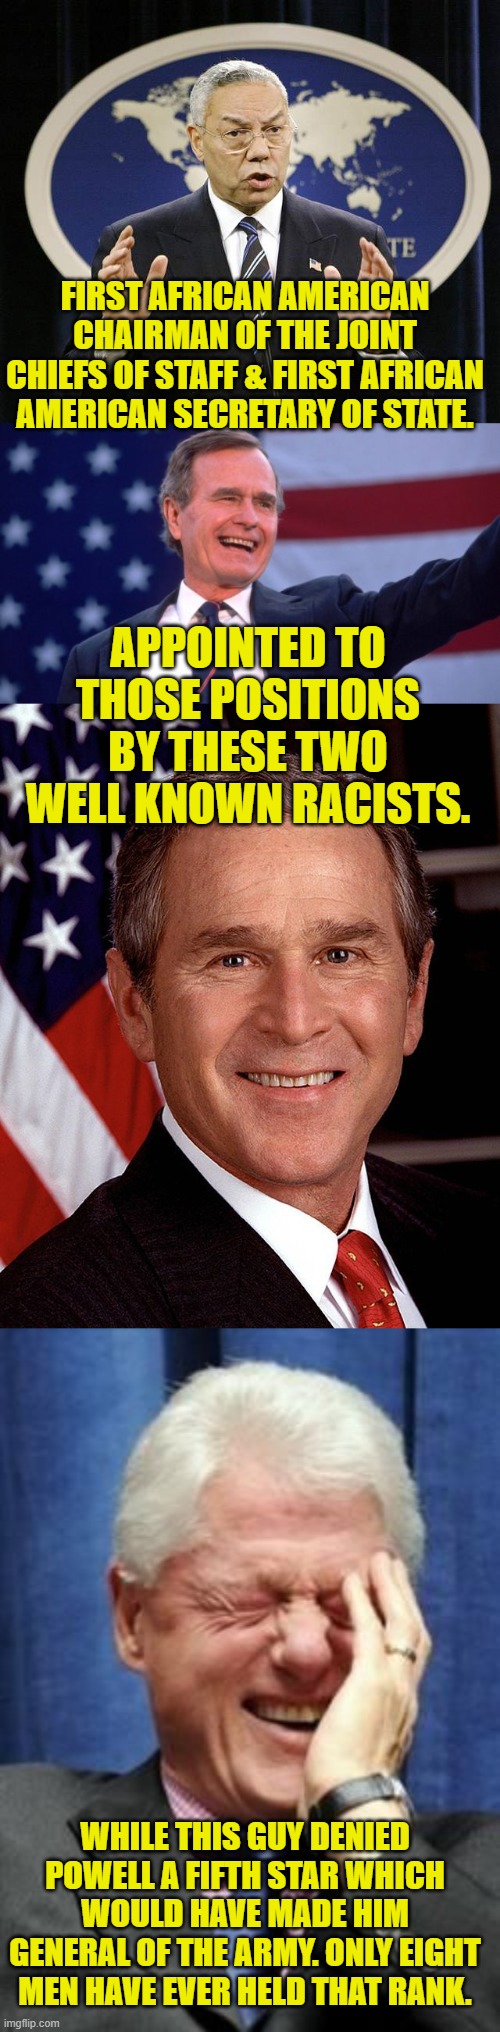 Wait, which party is "racist" again? | FIRST AFRICAN AMERICAN CHAIRMAN OF THE JOINT CHIEFS OF STAFF & FIRST AFRICAN AMERICAN SECRETARY OF STATE. APPOINTED TO THOSE POSITIONS BY THESE TWO WELL KNOWN RACISTS. WHILE THIS GUY DENIED POWELL A FIFTH STAR WHICH WOULD HAVE MADE HIM GENERAL OF THE ARMY. ONLY EIGHT MEN HAVE EVER HELD THAT RANK. | image tagged in colin powell,george herbert walker bush,george w bush,bill clinton laughing,racist | made w/ Imgflip meme maker